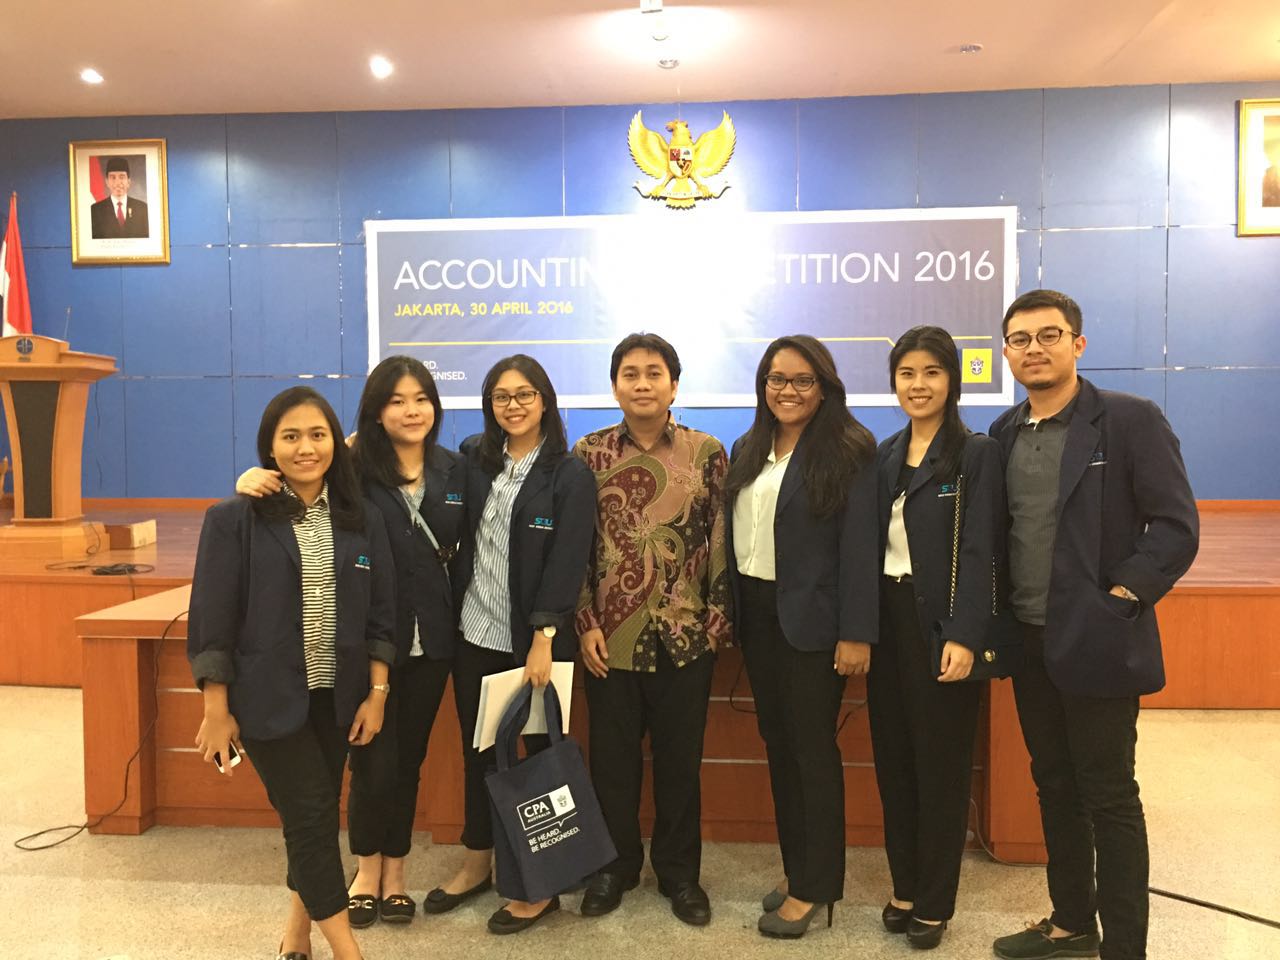 Accounting Students of SGU Participated in the CPA Australia Accounting Competition 2016